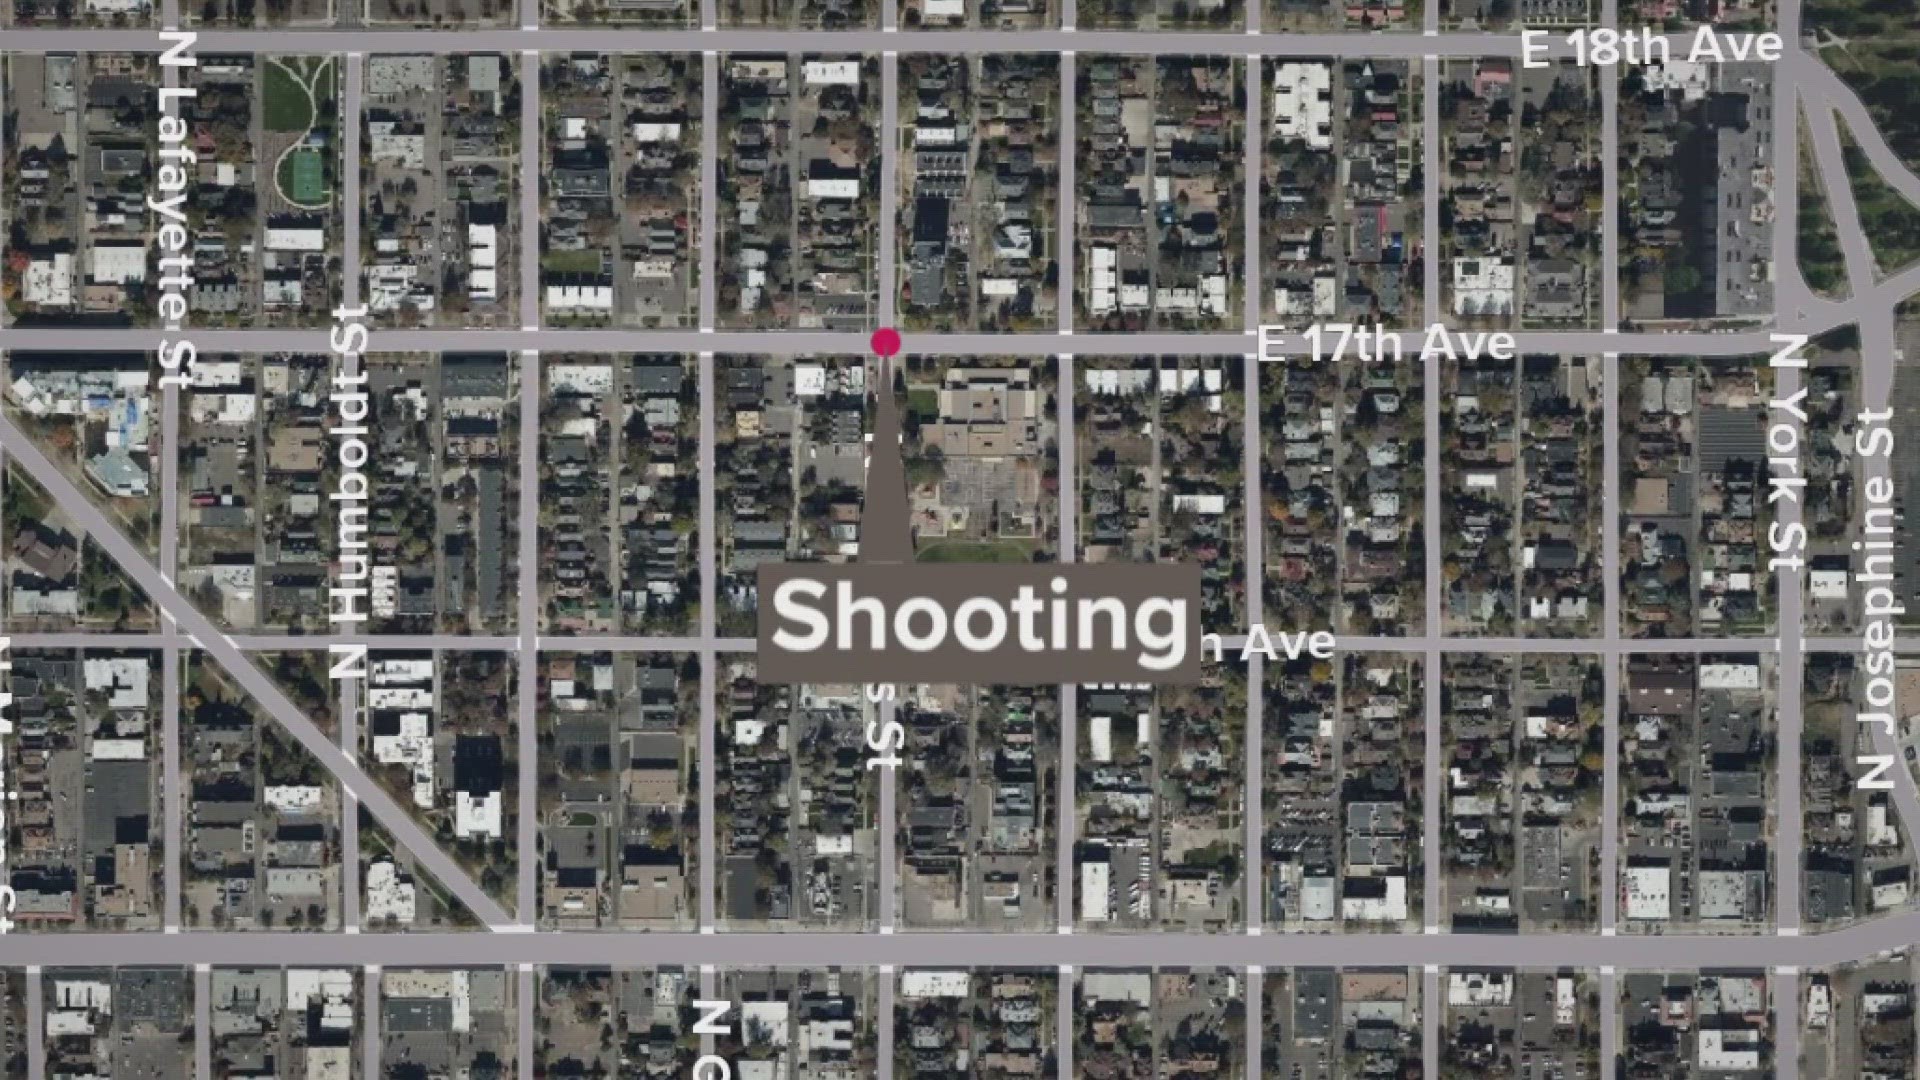 Police said the shooting happened on East 17th Avenue near the intersection with Williams Street.